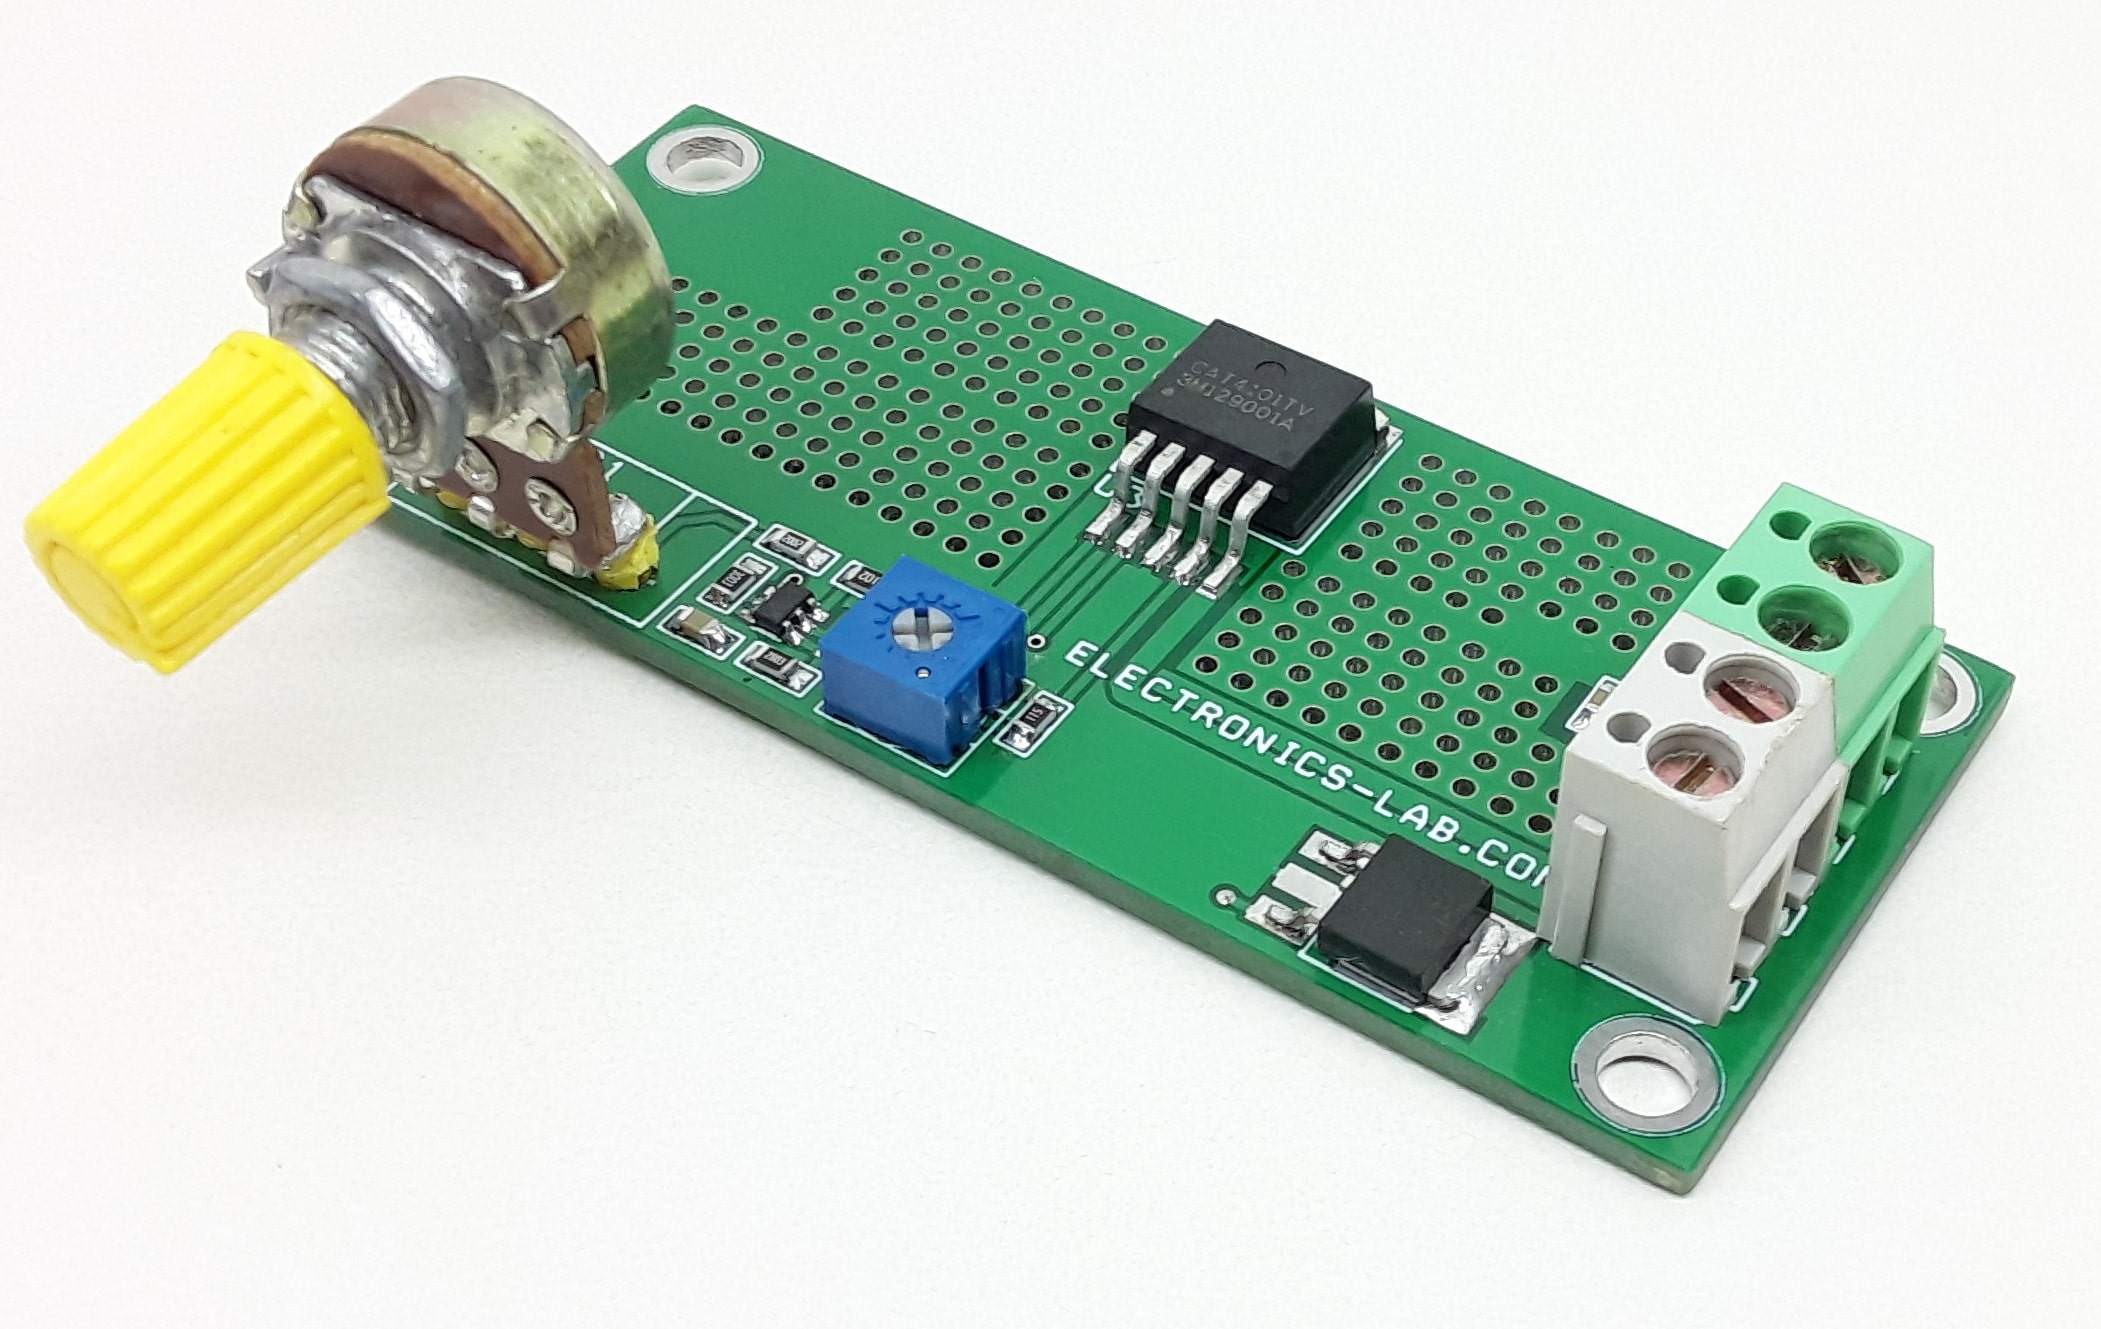 12W Constant-Current LED Driver with PWM Dimming - 12V DC@1A Input